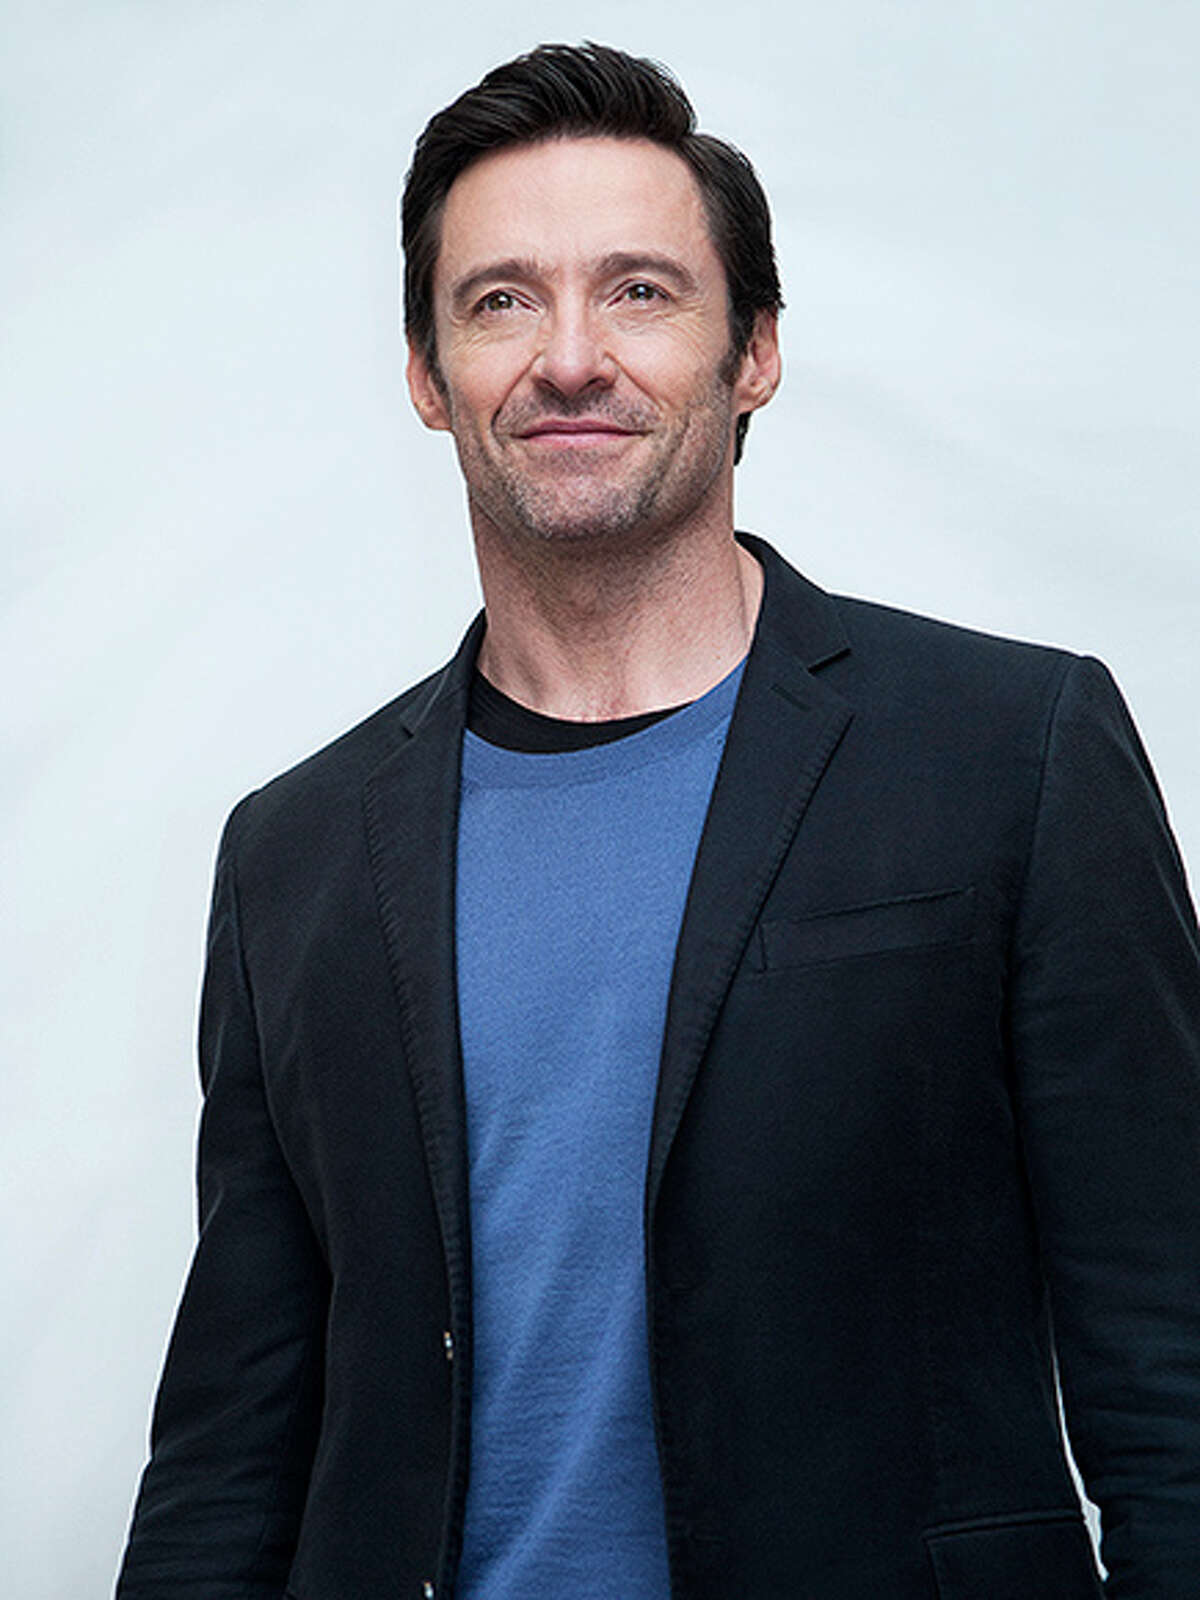 HUGH JACKMAN "Logan" star: "Education. He preached education. And passion, like find whatever you're good at then do everything you can to learn every bit of it, and don't go out into the world until you've studied."